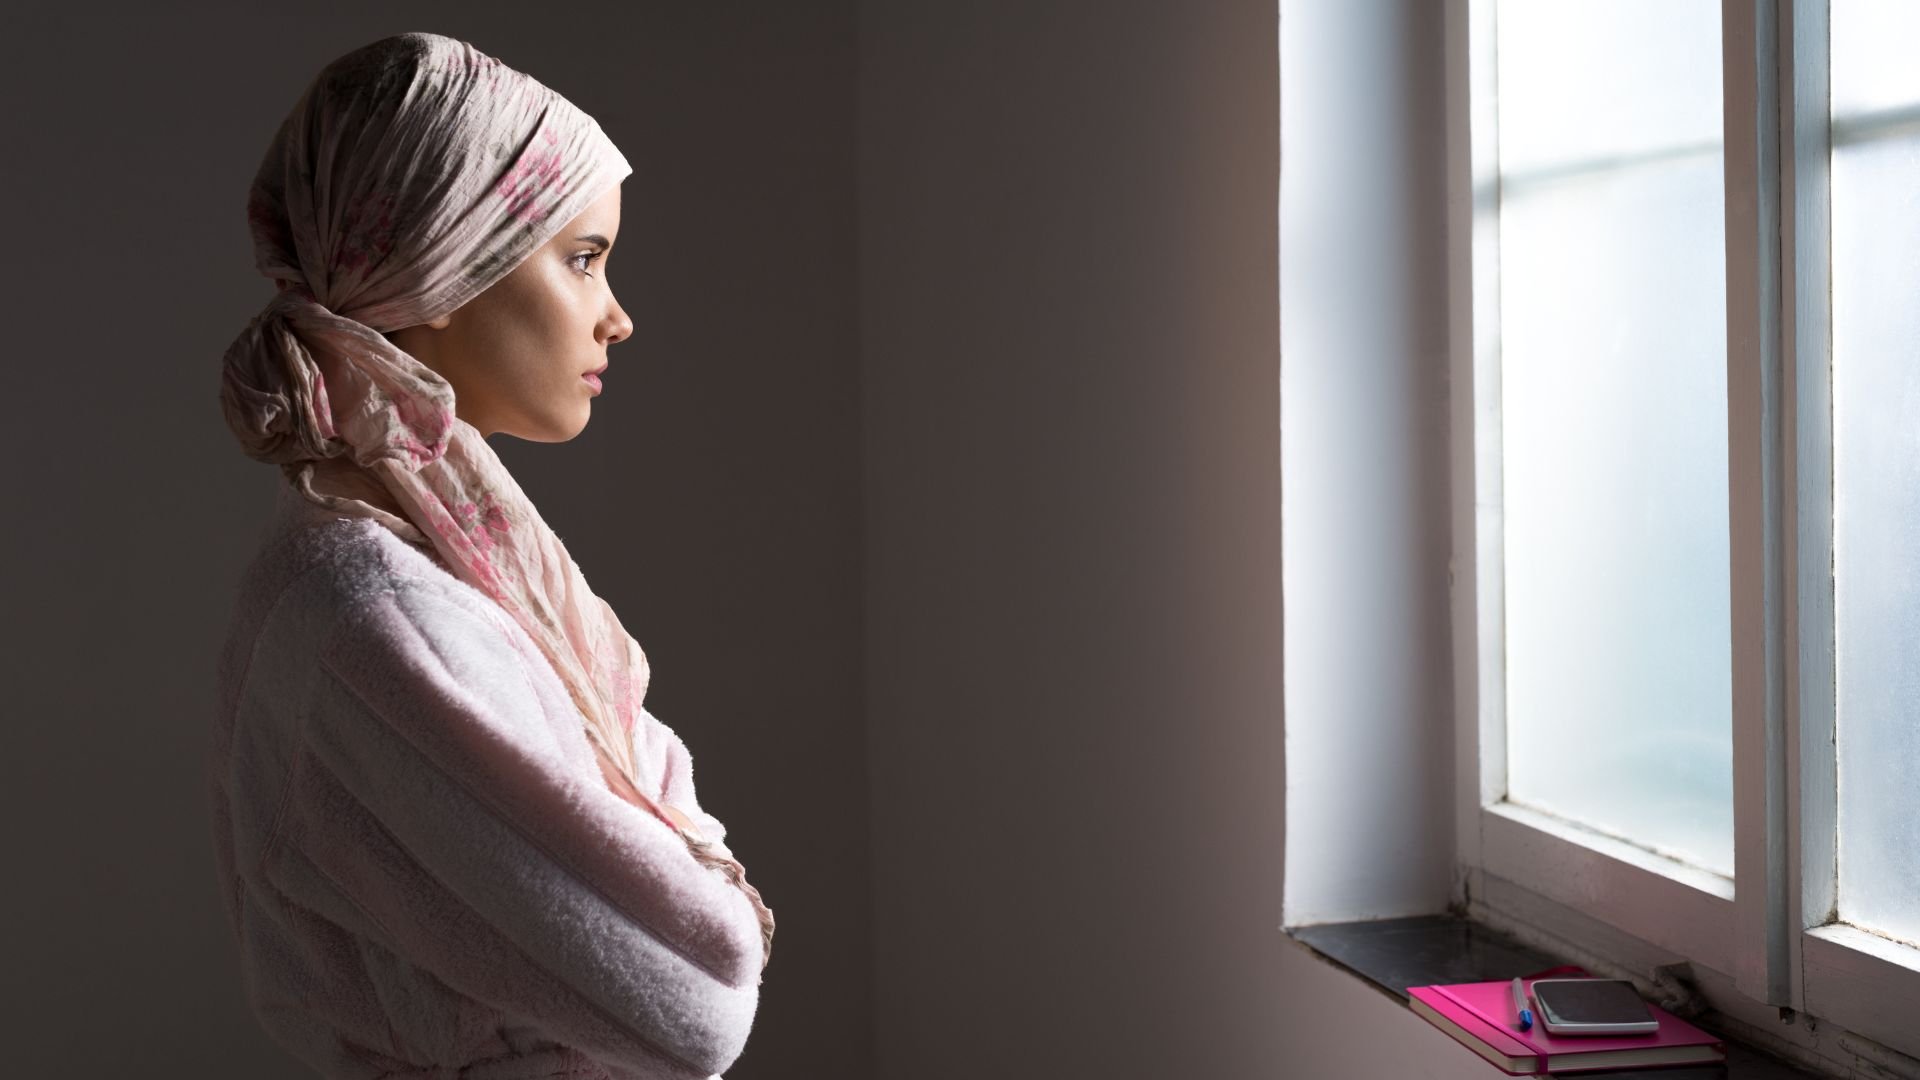 Woman with headscarf crosses her arms while looking out of window